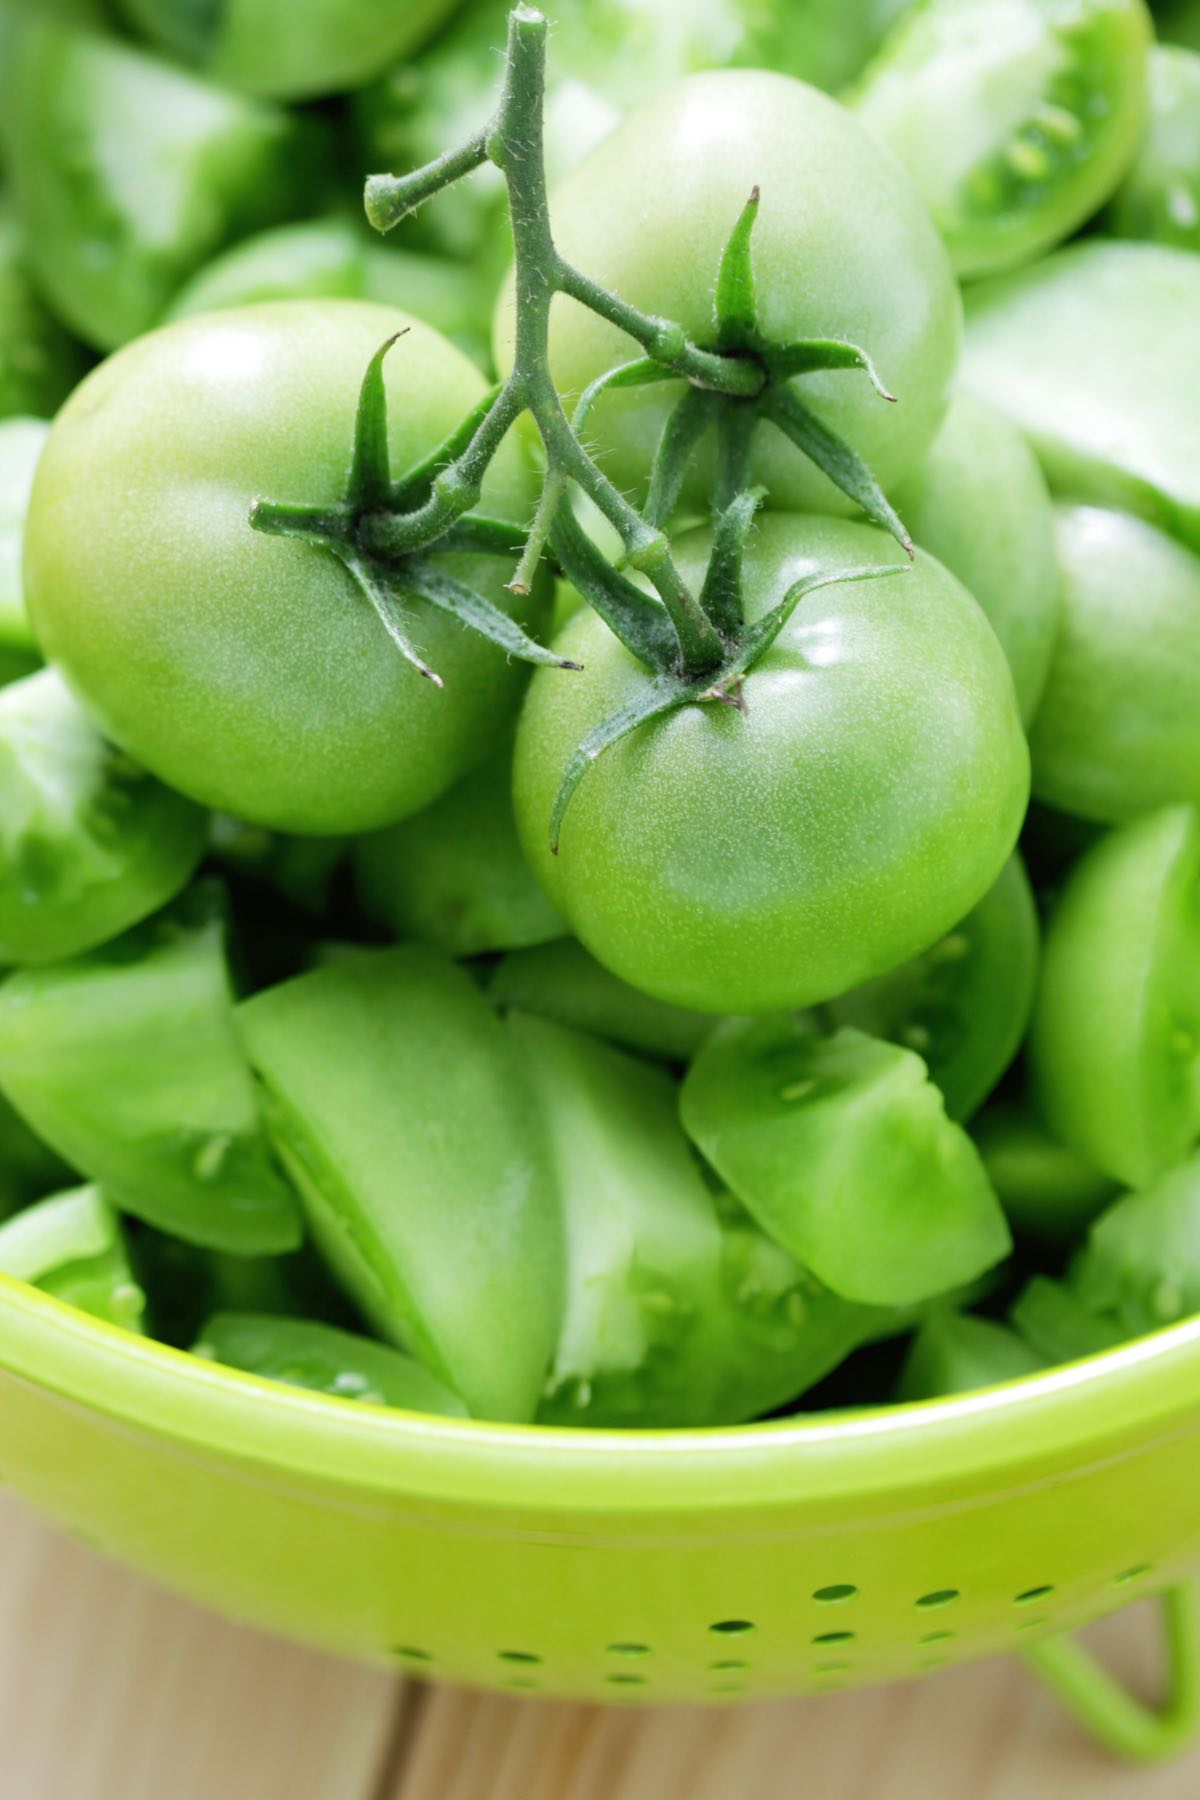 Washed green tomatoes